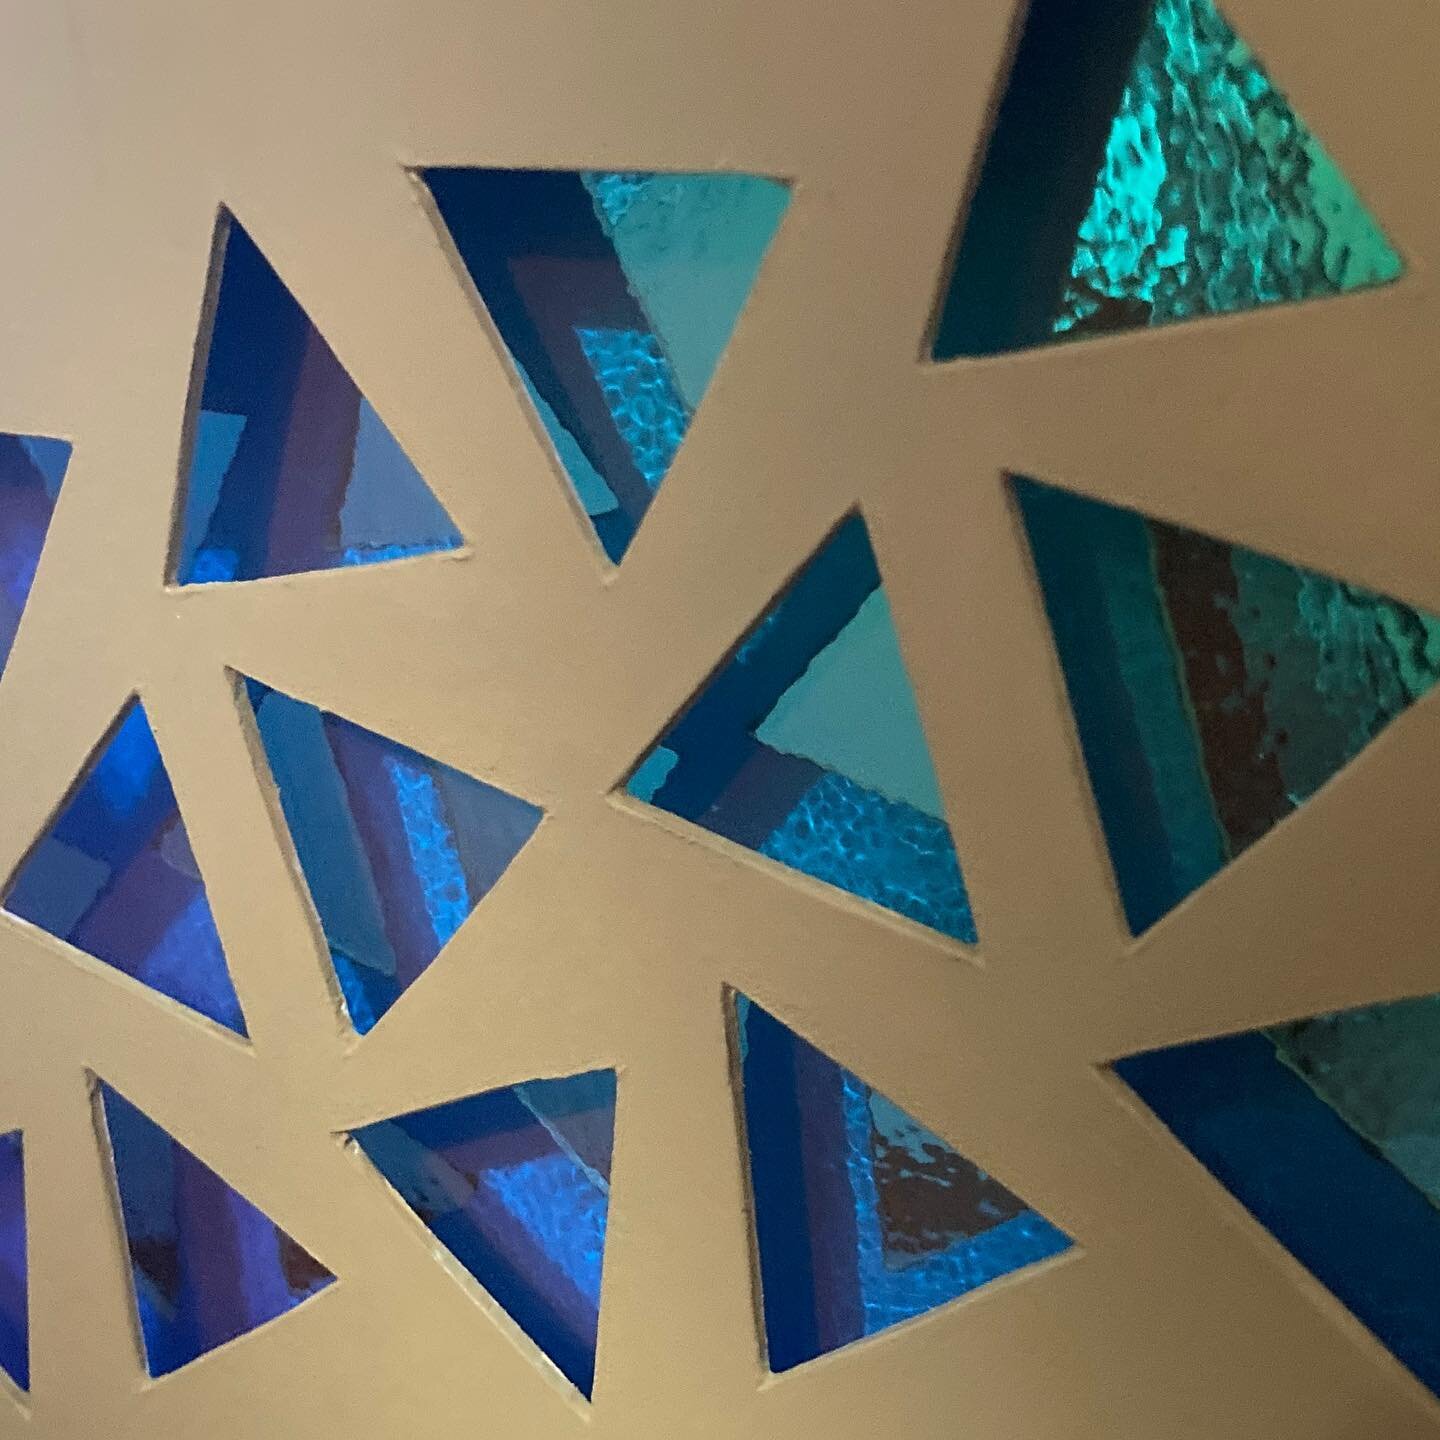 Another peek at some work in progress for Geometry Lessons, my solo exhibit @bostonsculptors 

Geometry Lessons
(works on and of paper)
&nbsp;&nbsp;
June 14- July 16,
First Friday reception July 7, 5-8:30
Reception and talk with Michelle Lougee and m